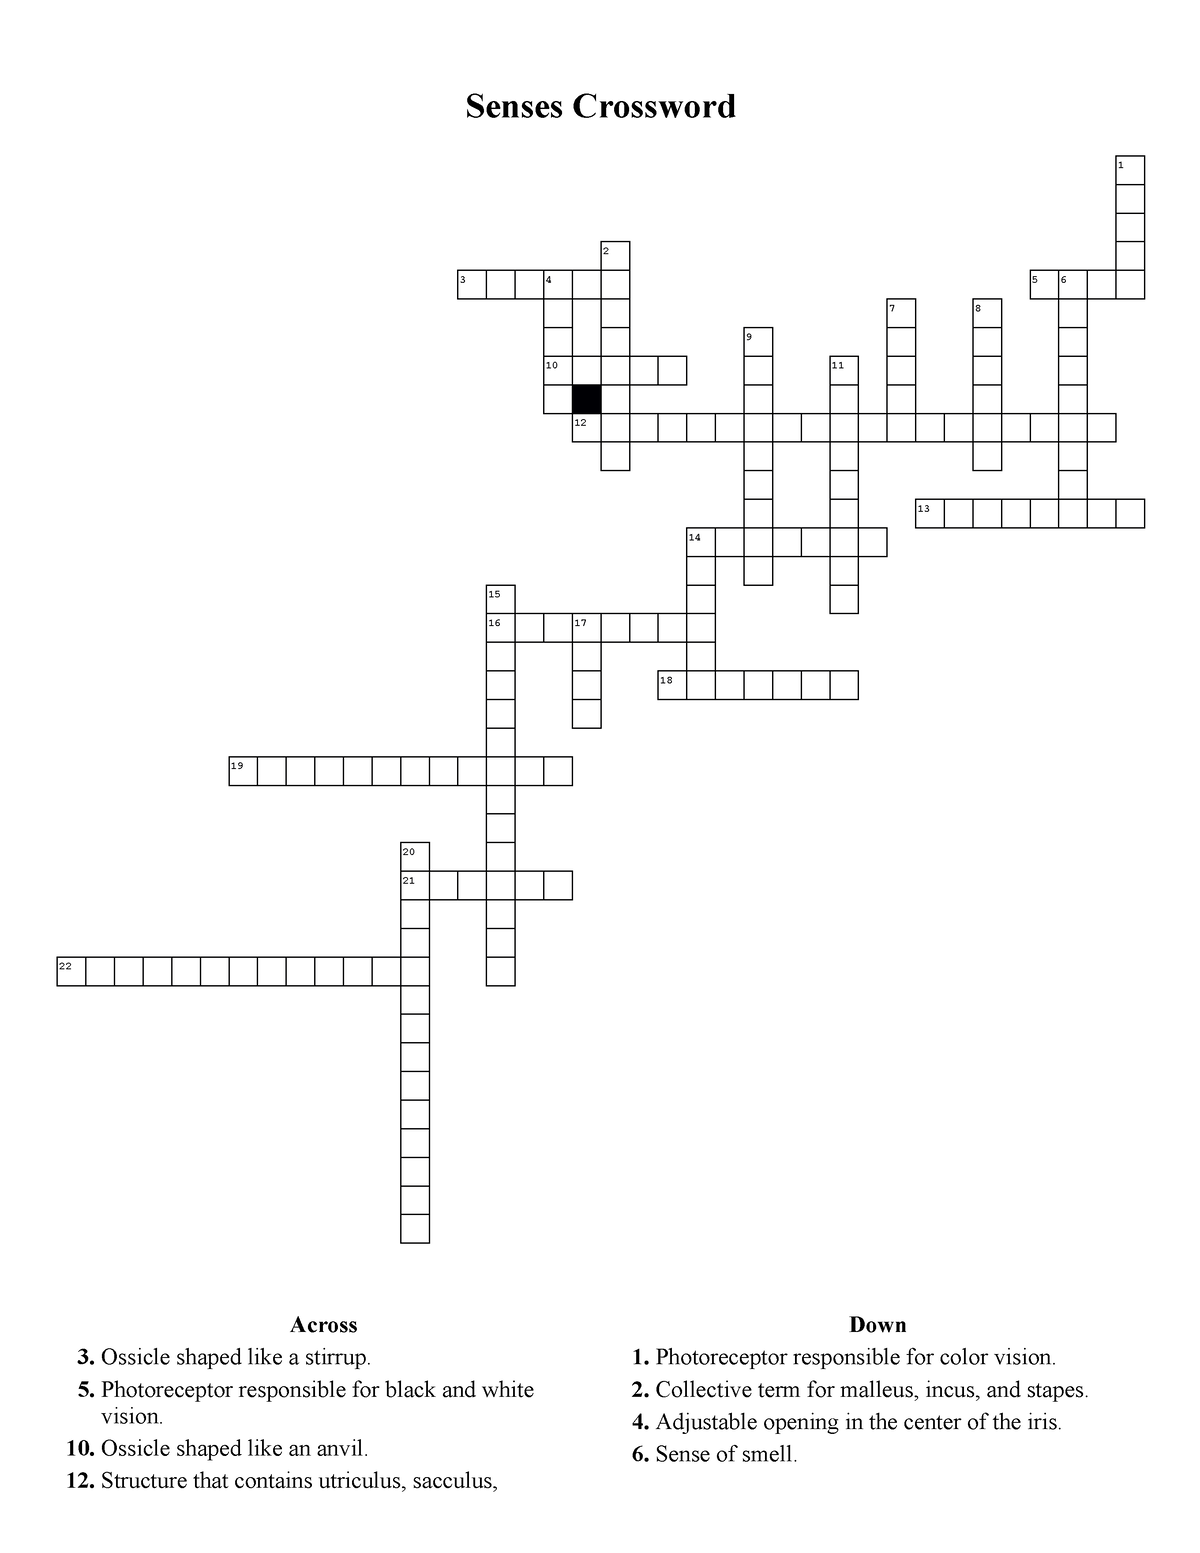 Senses Crossword FA22 This document as well as others posted will